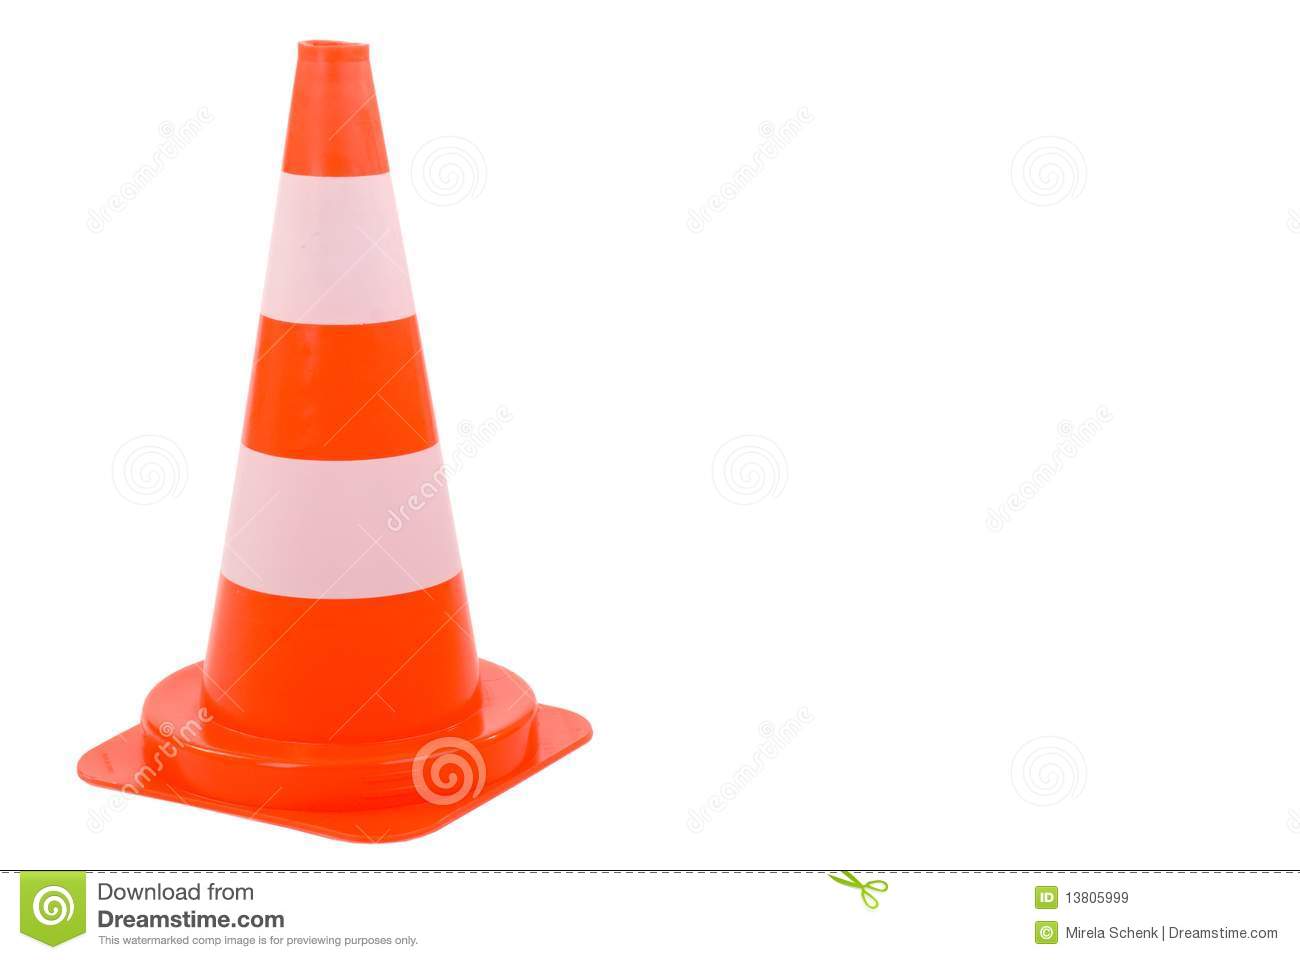 Safety Cone  Royalty Free Stock Images   Image  13805999